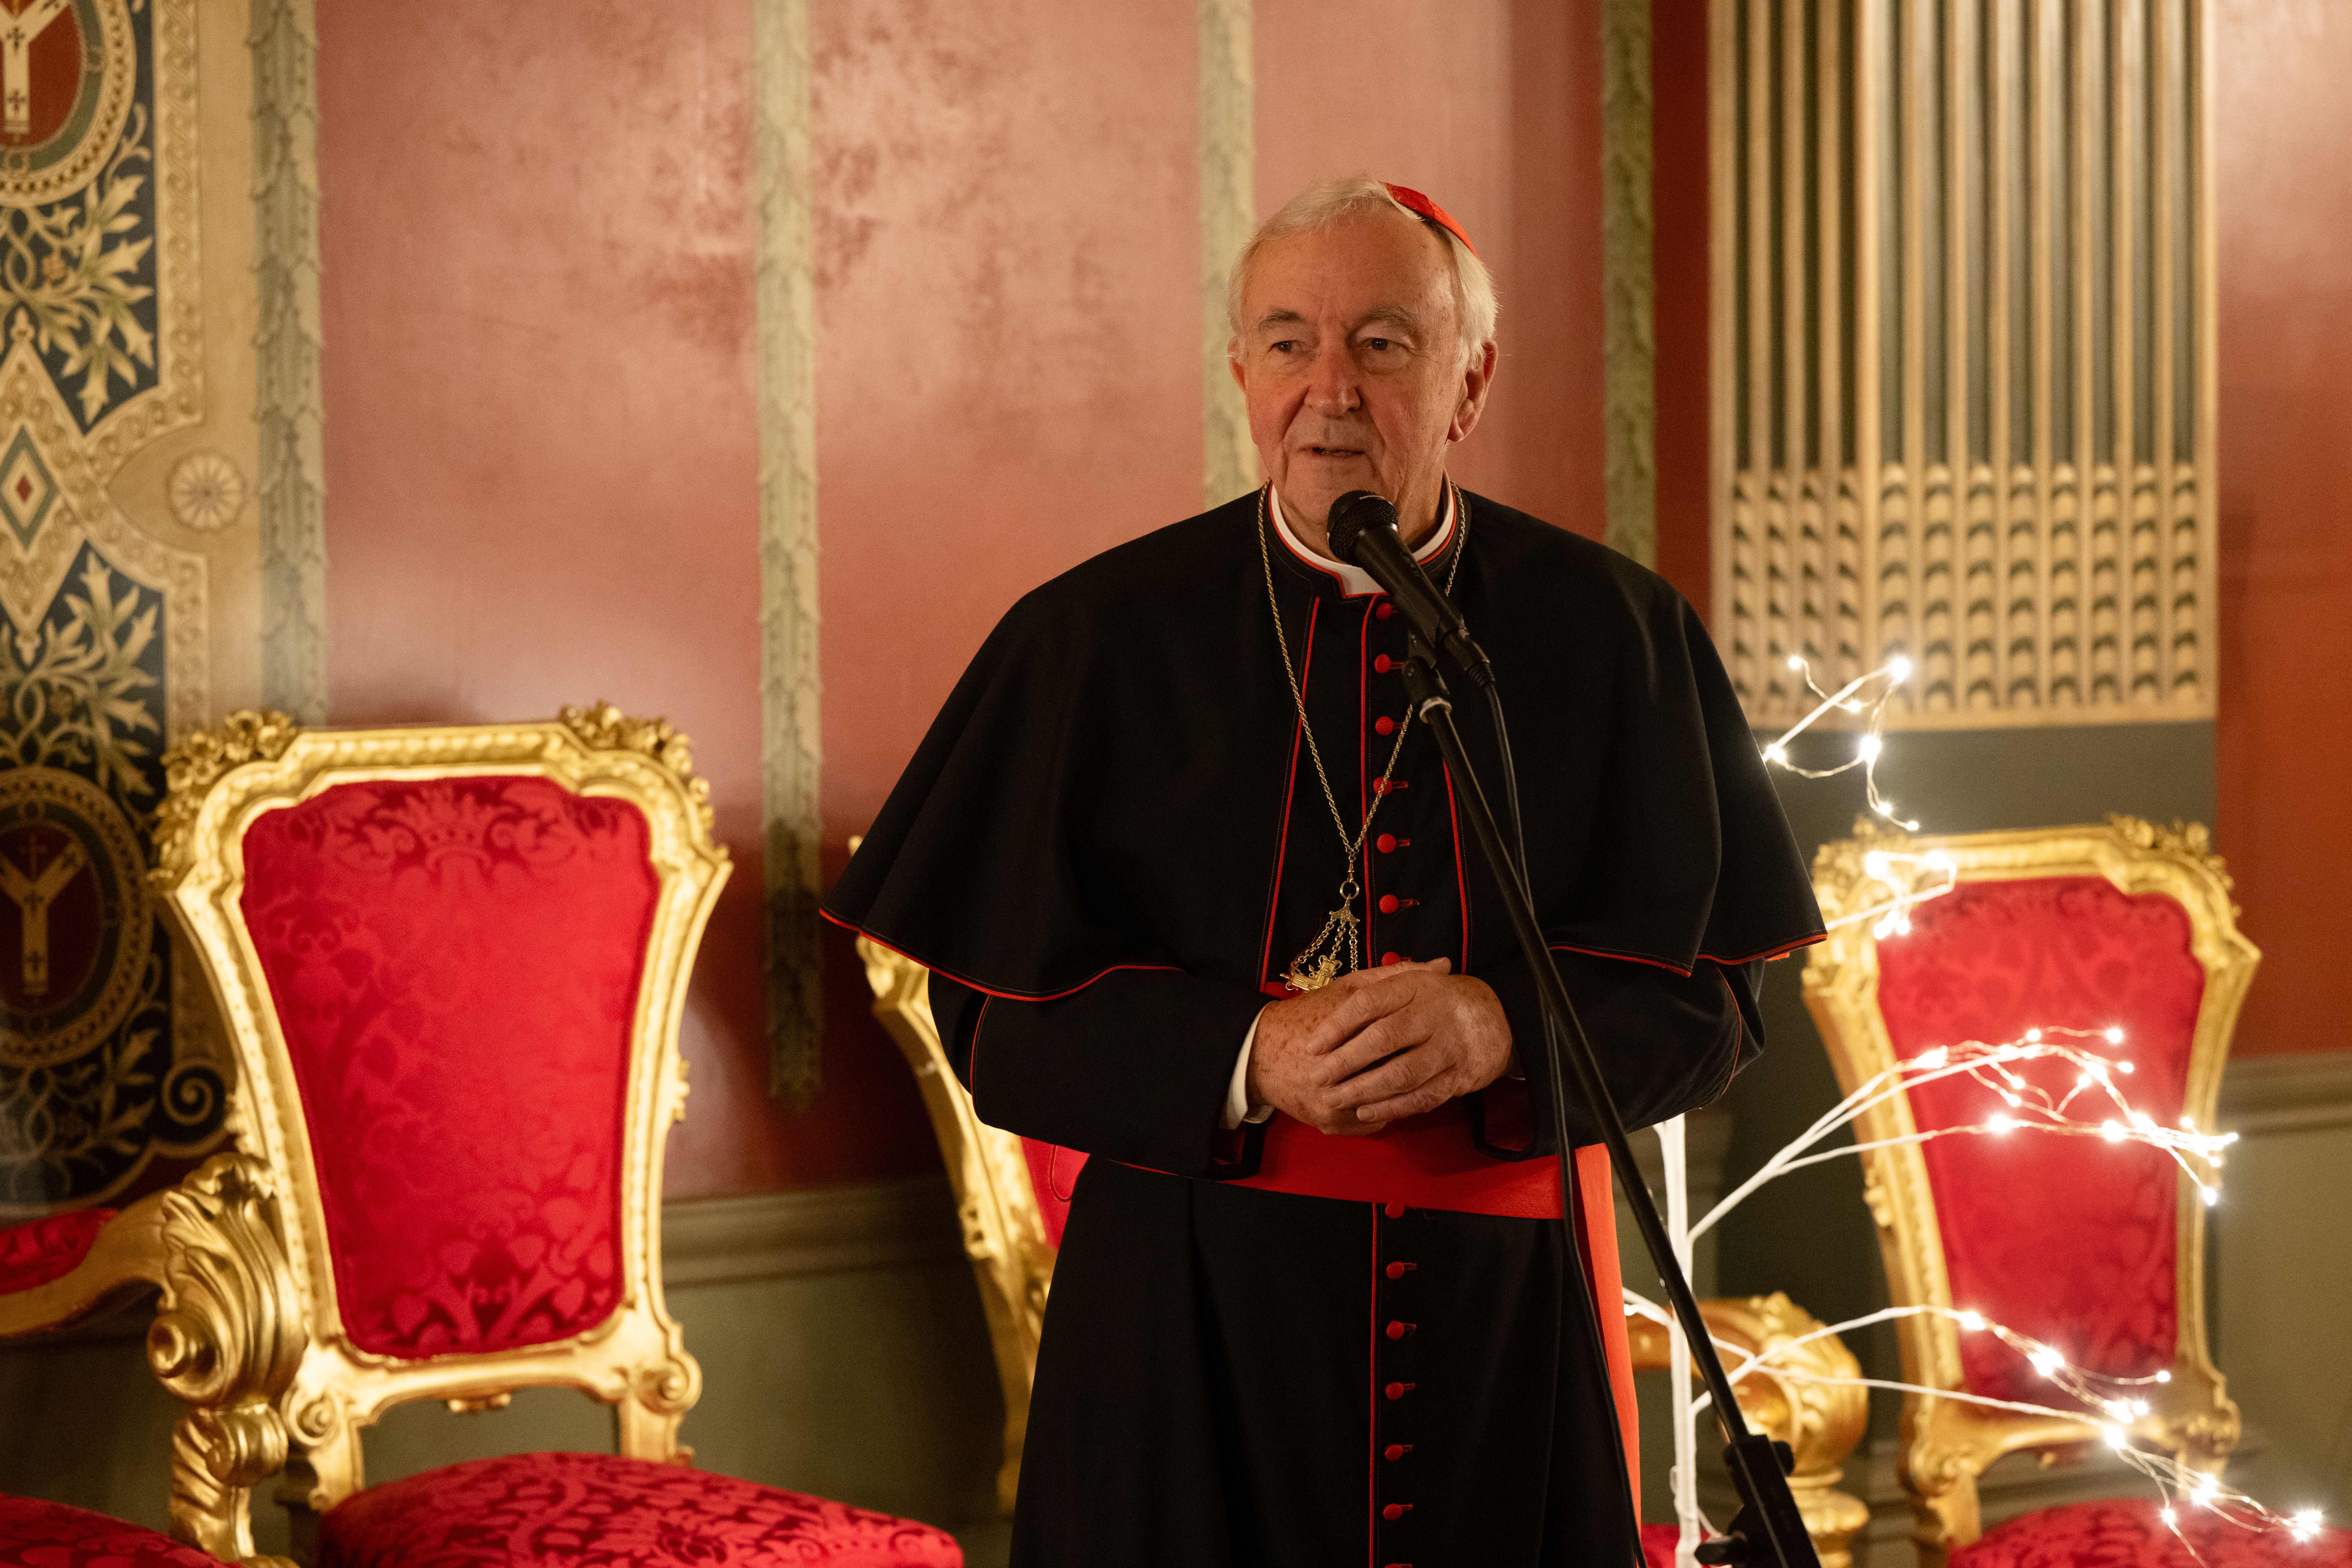 Blessings offer ‘grace and mercy’, not approval, says cardinal